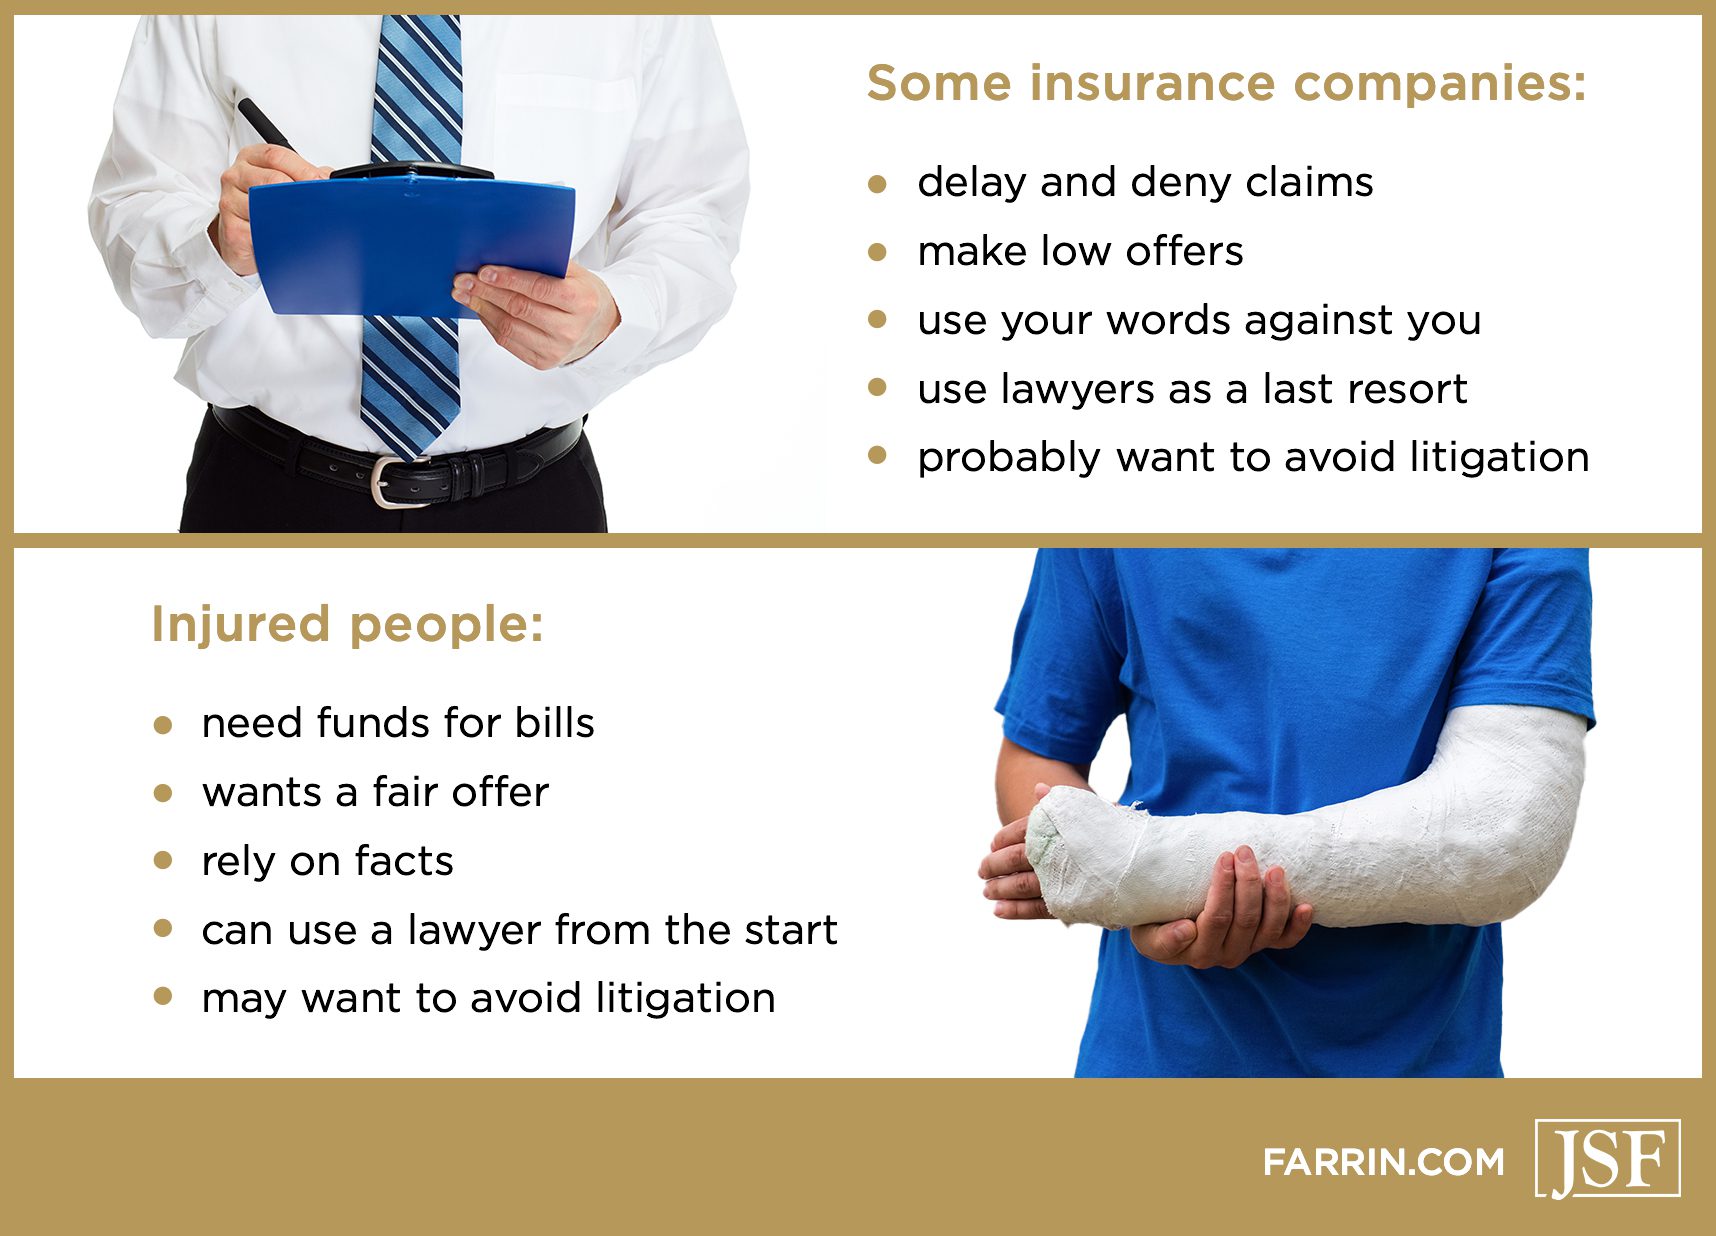 The contrast between insurance company and injury person motives